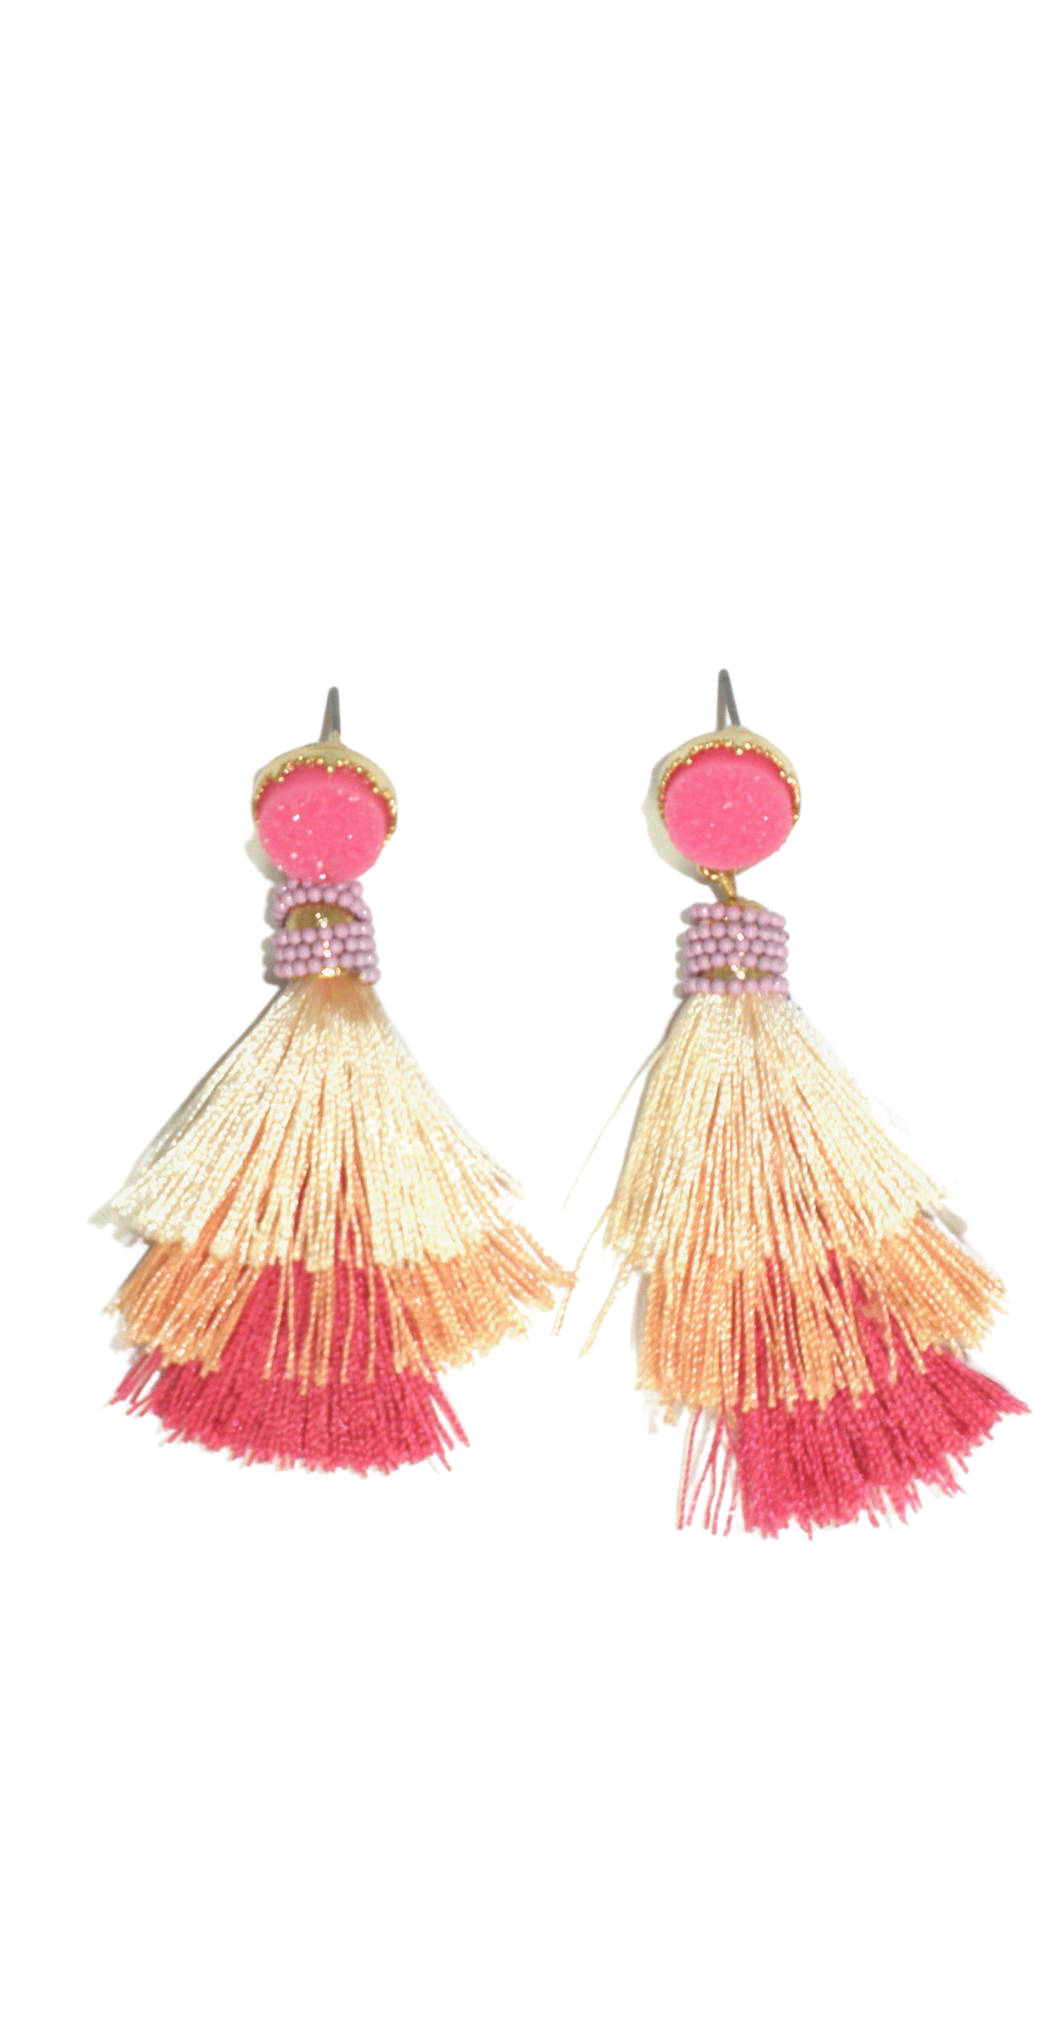 Tassel Earrings with Pink Stud - The Fashion Foundation - {{ discount designer}}